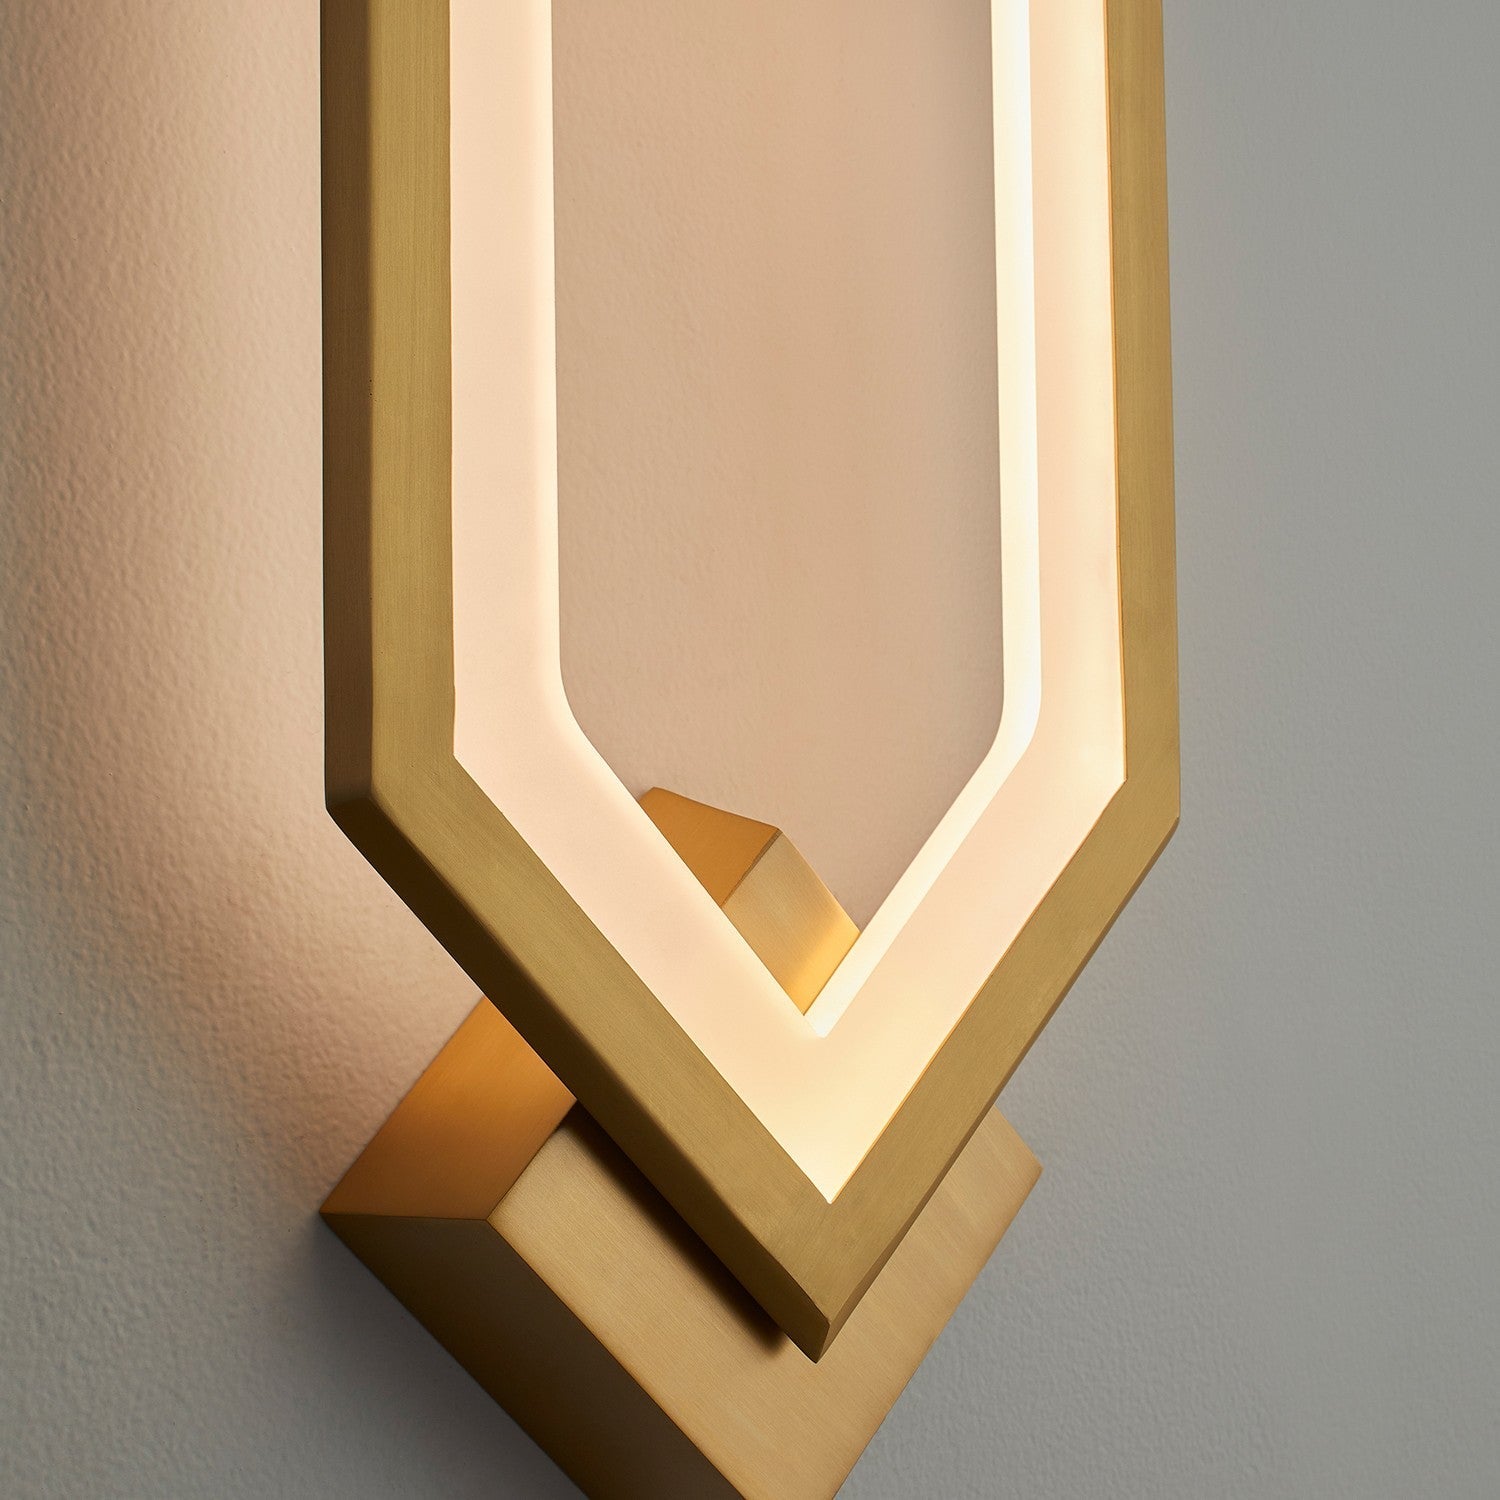 Oxygen Aegis 3-59-40 Contemporary Modern LED Wall Sconce Light - Aged Brass